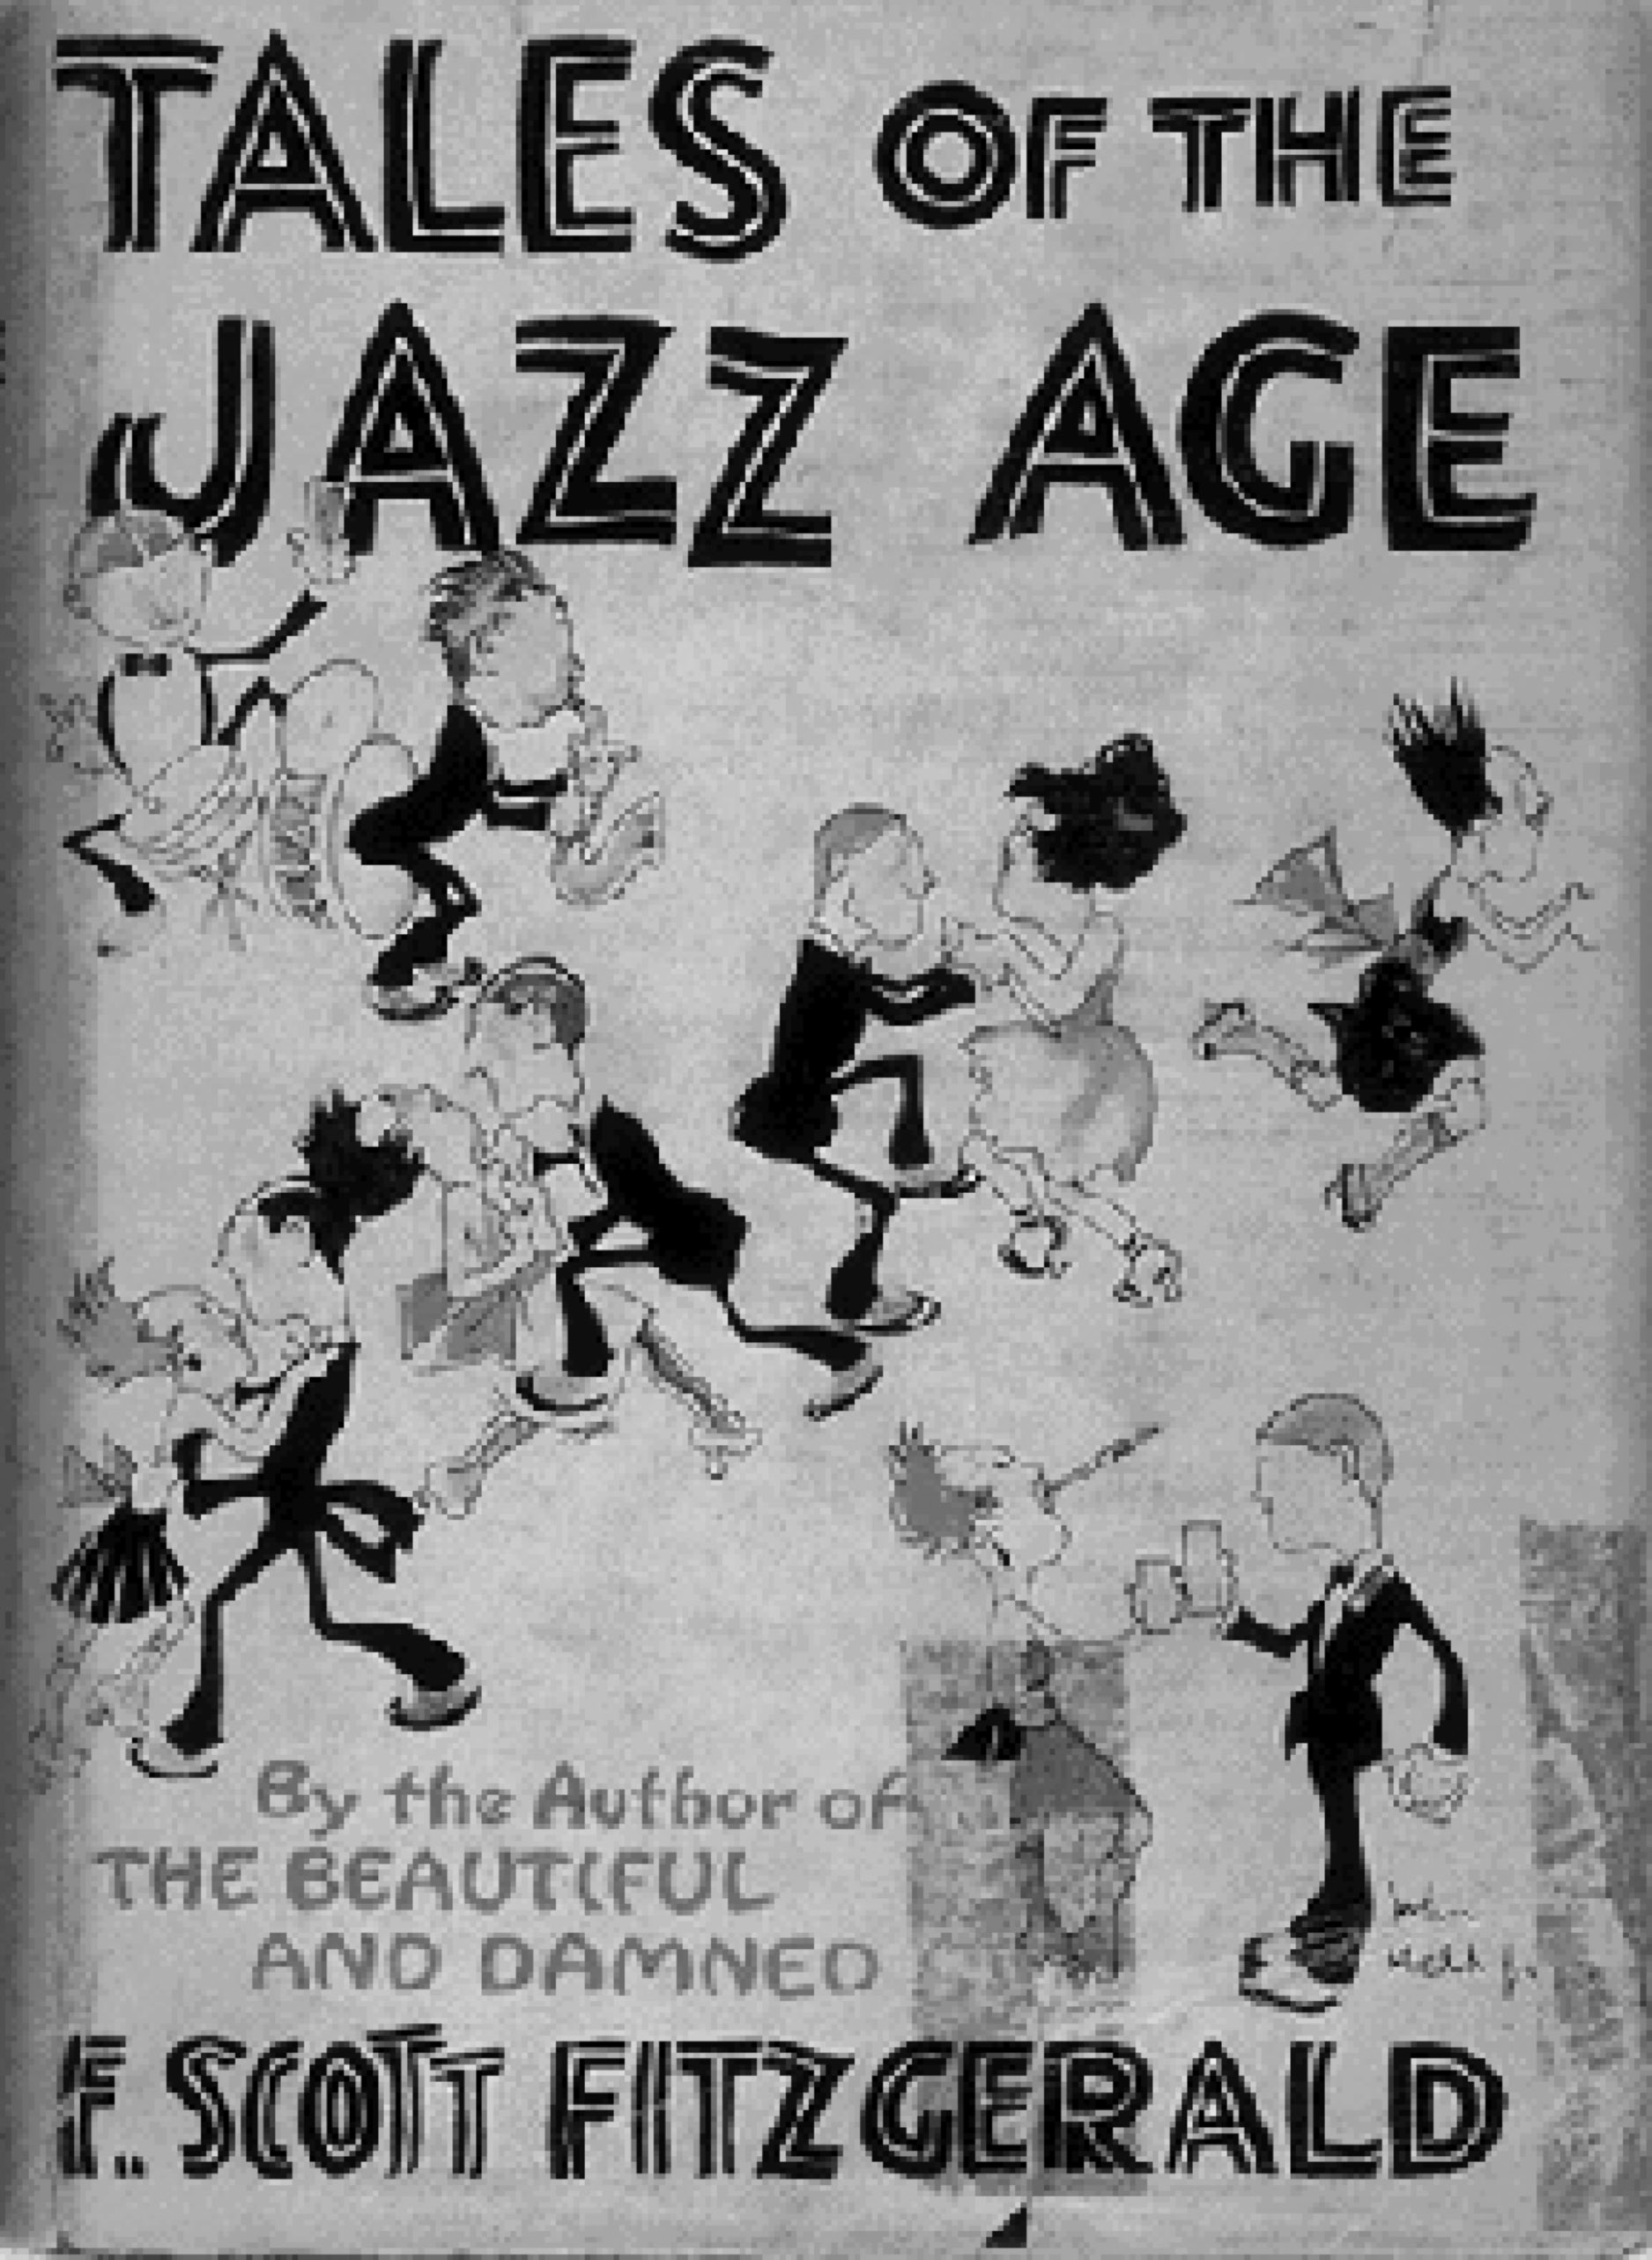 Popular and Material Culture in the Jazz Age (1918–1929) (Part V